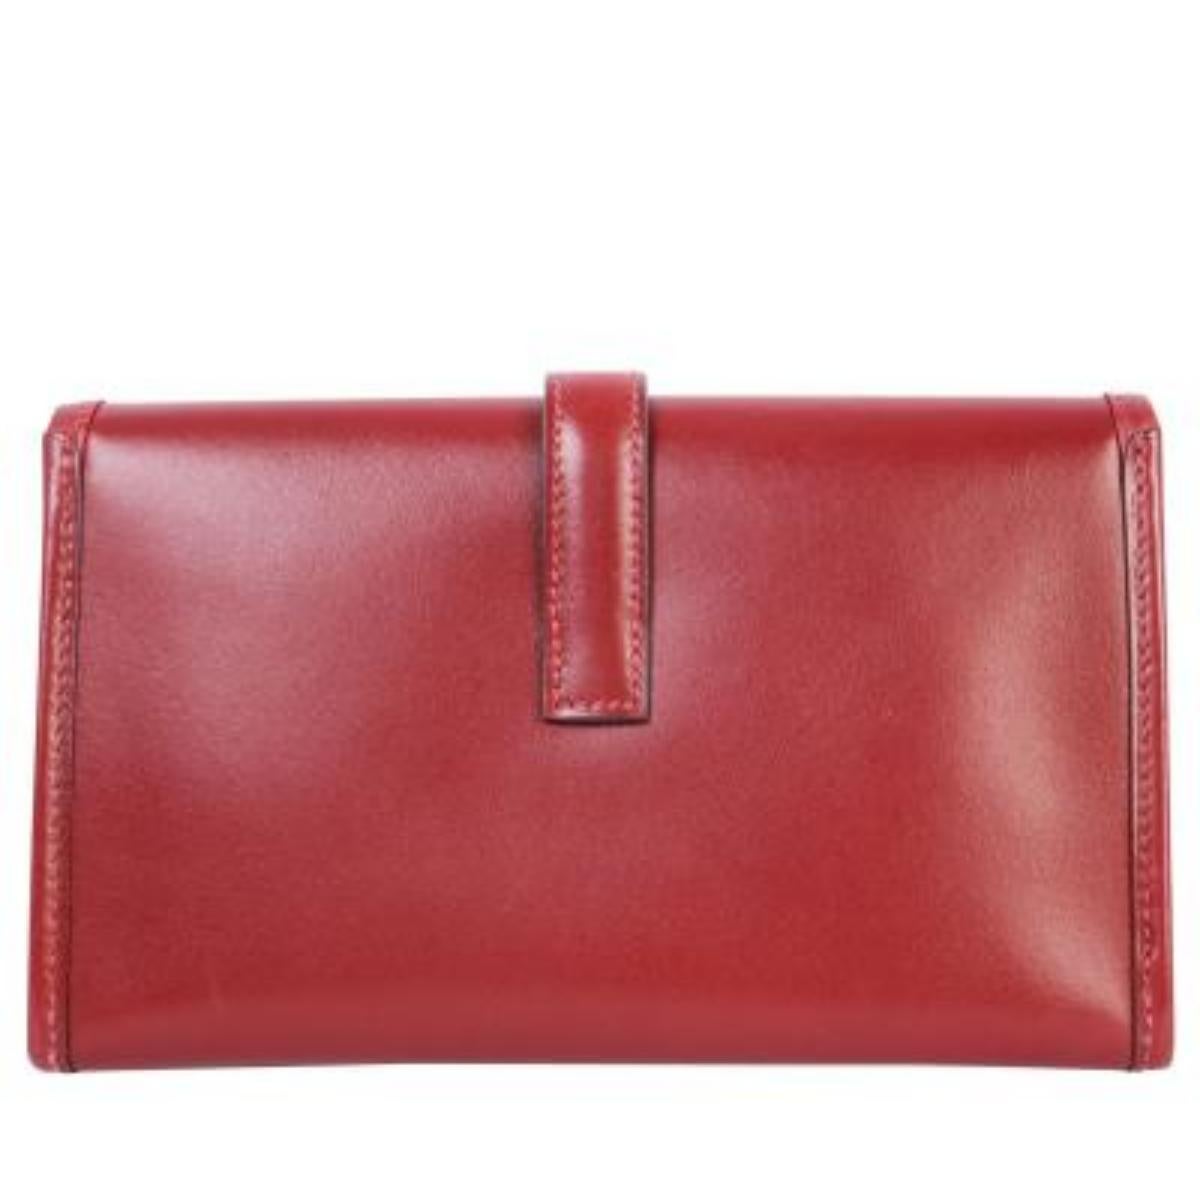 Hermes Burgundy Box Calfskin Jige Clutch In Excellent Condition In London, GB